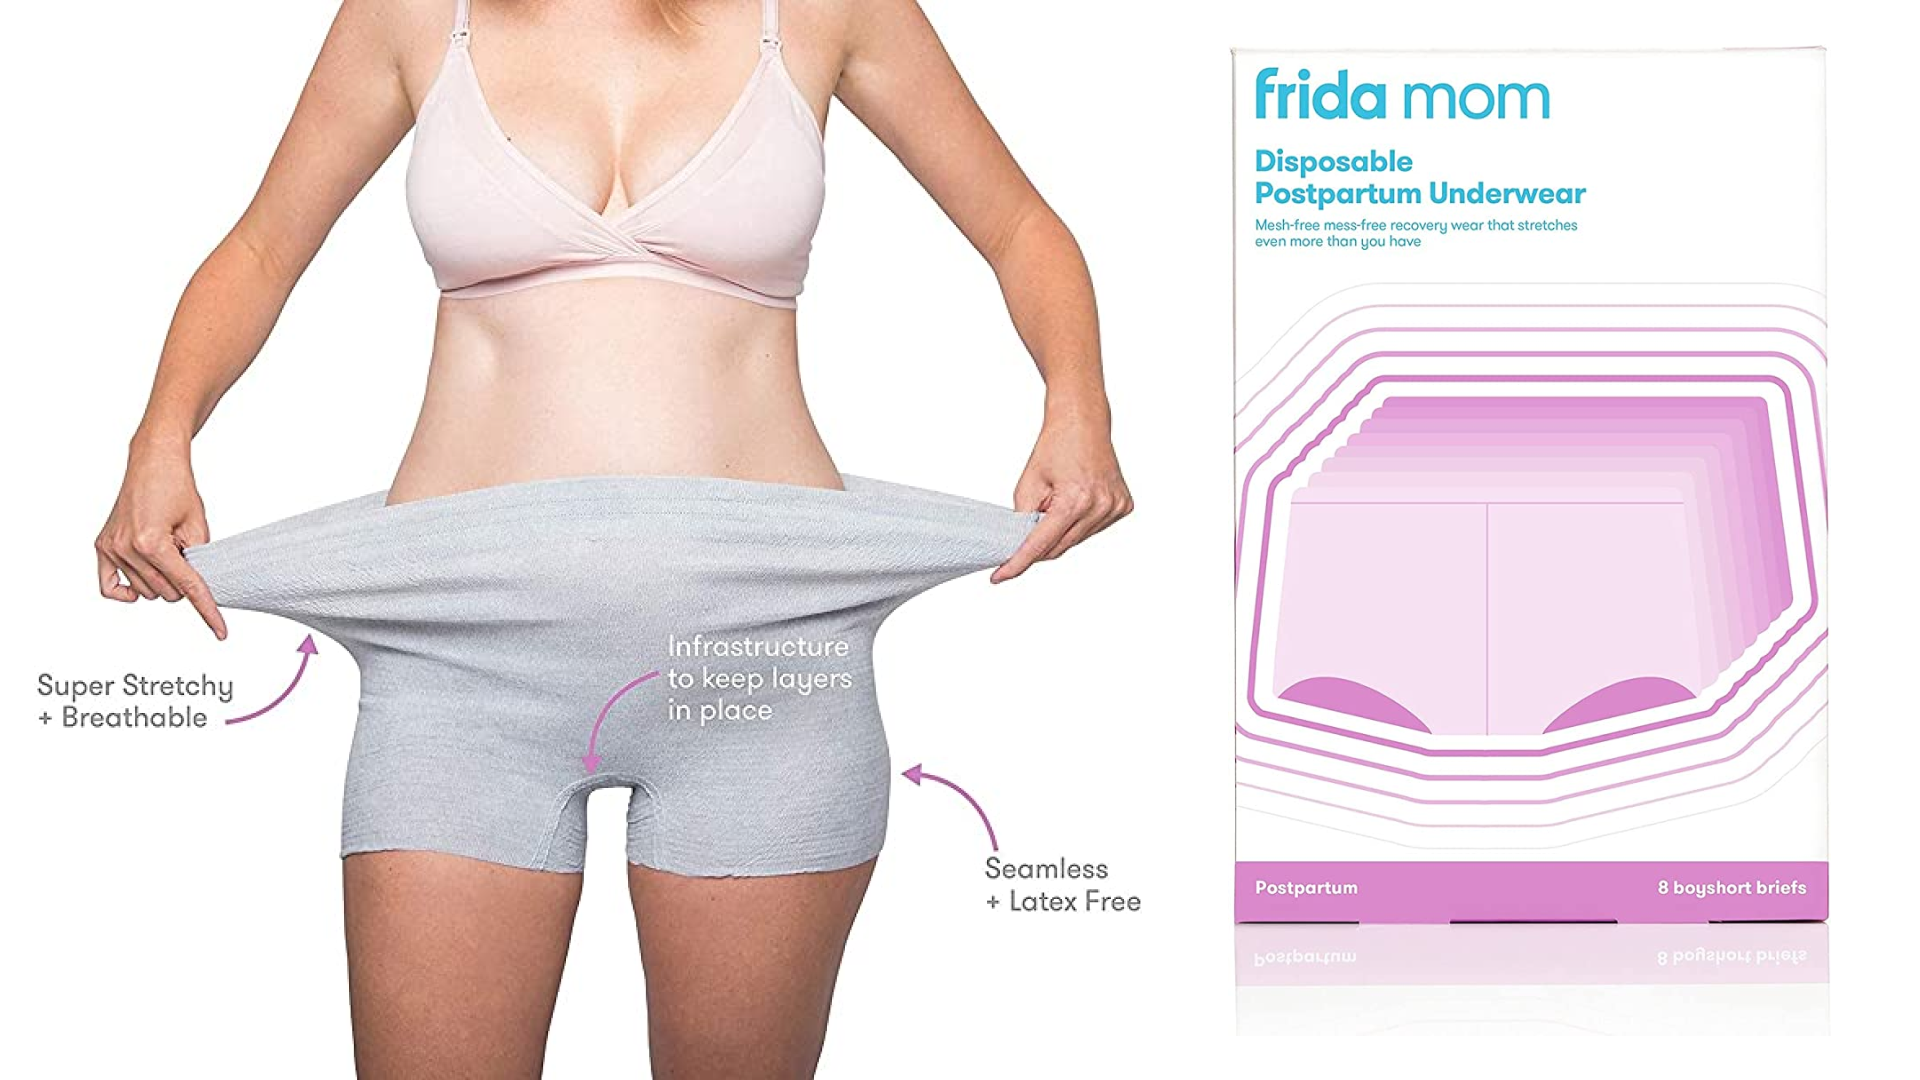 A Practical Guide to Pregnancy and Postpartum Underwear